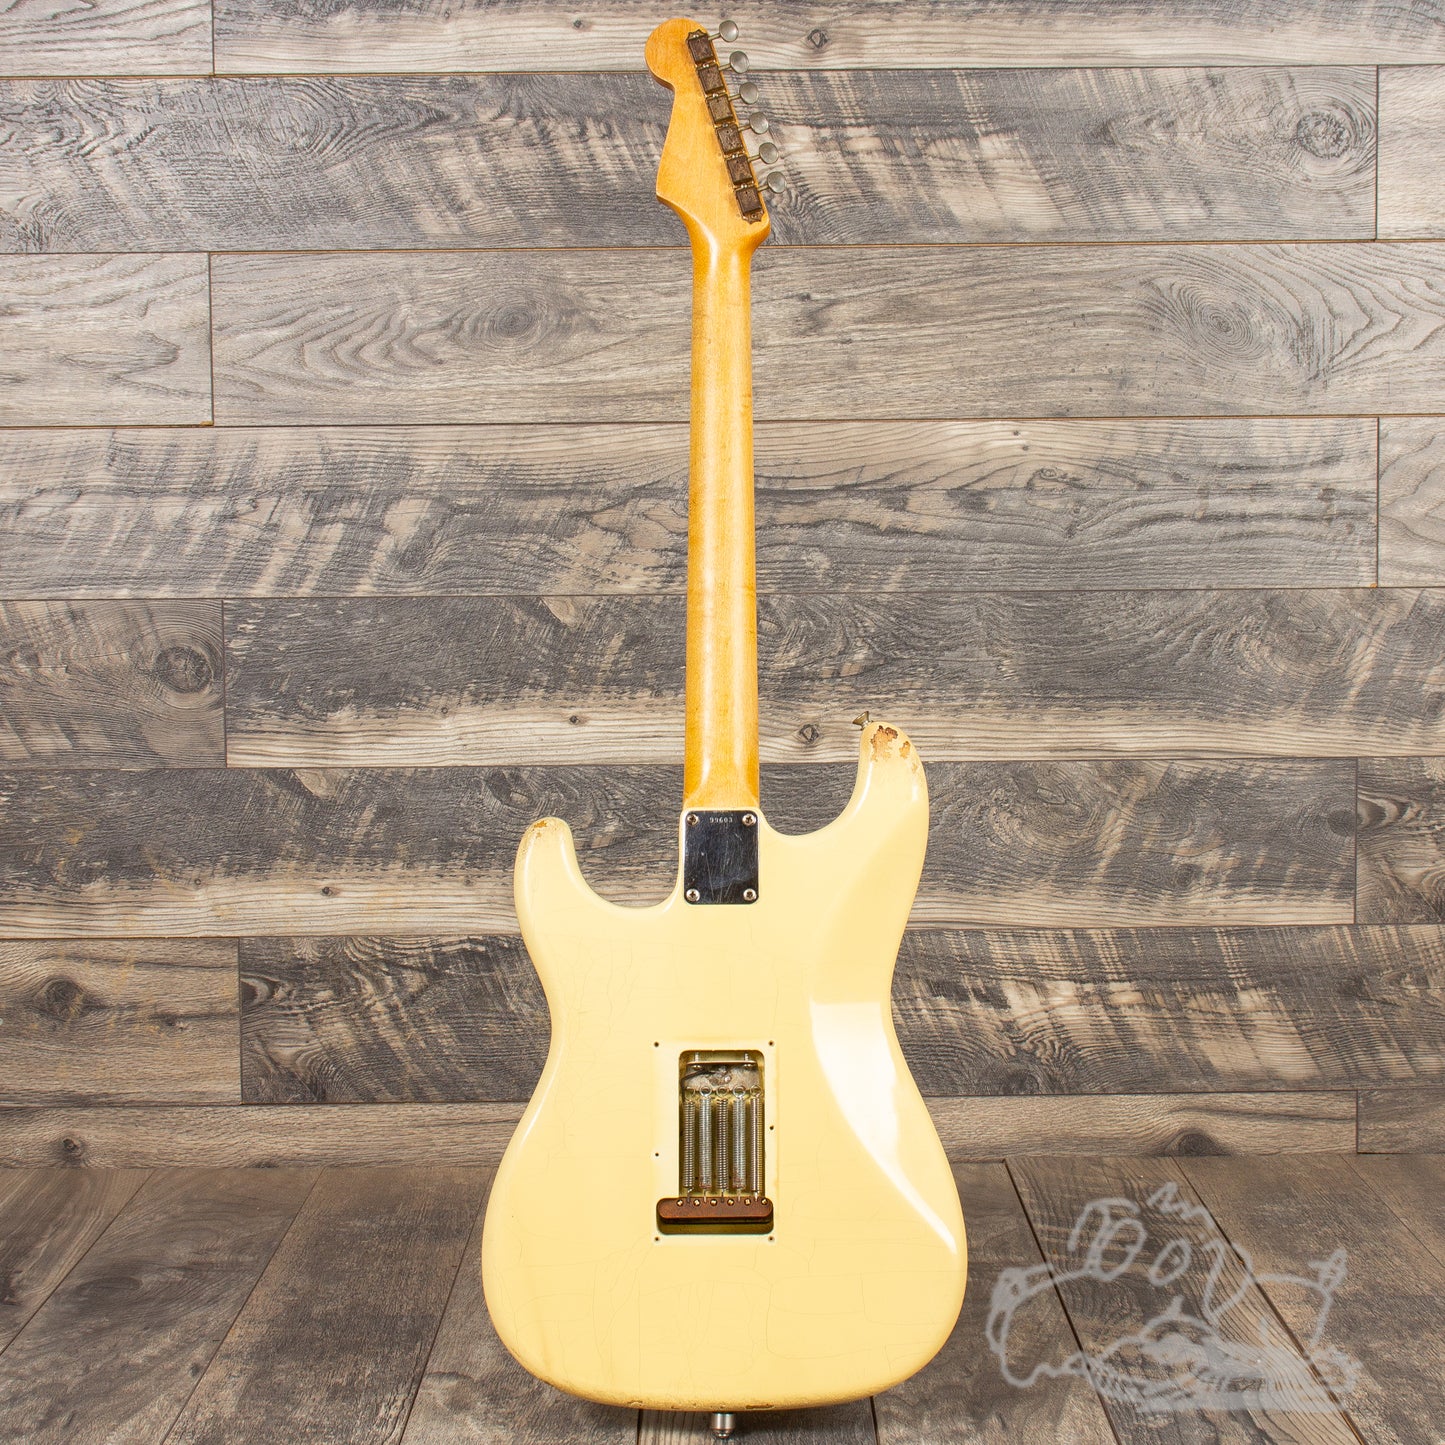 1963 Fender Stratocaster - Refinished in Olympic White